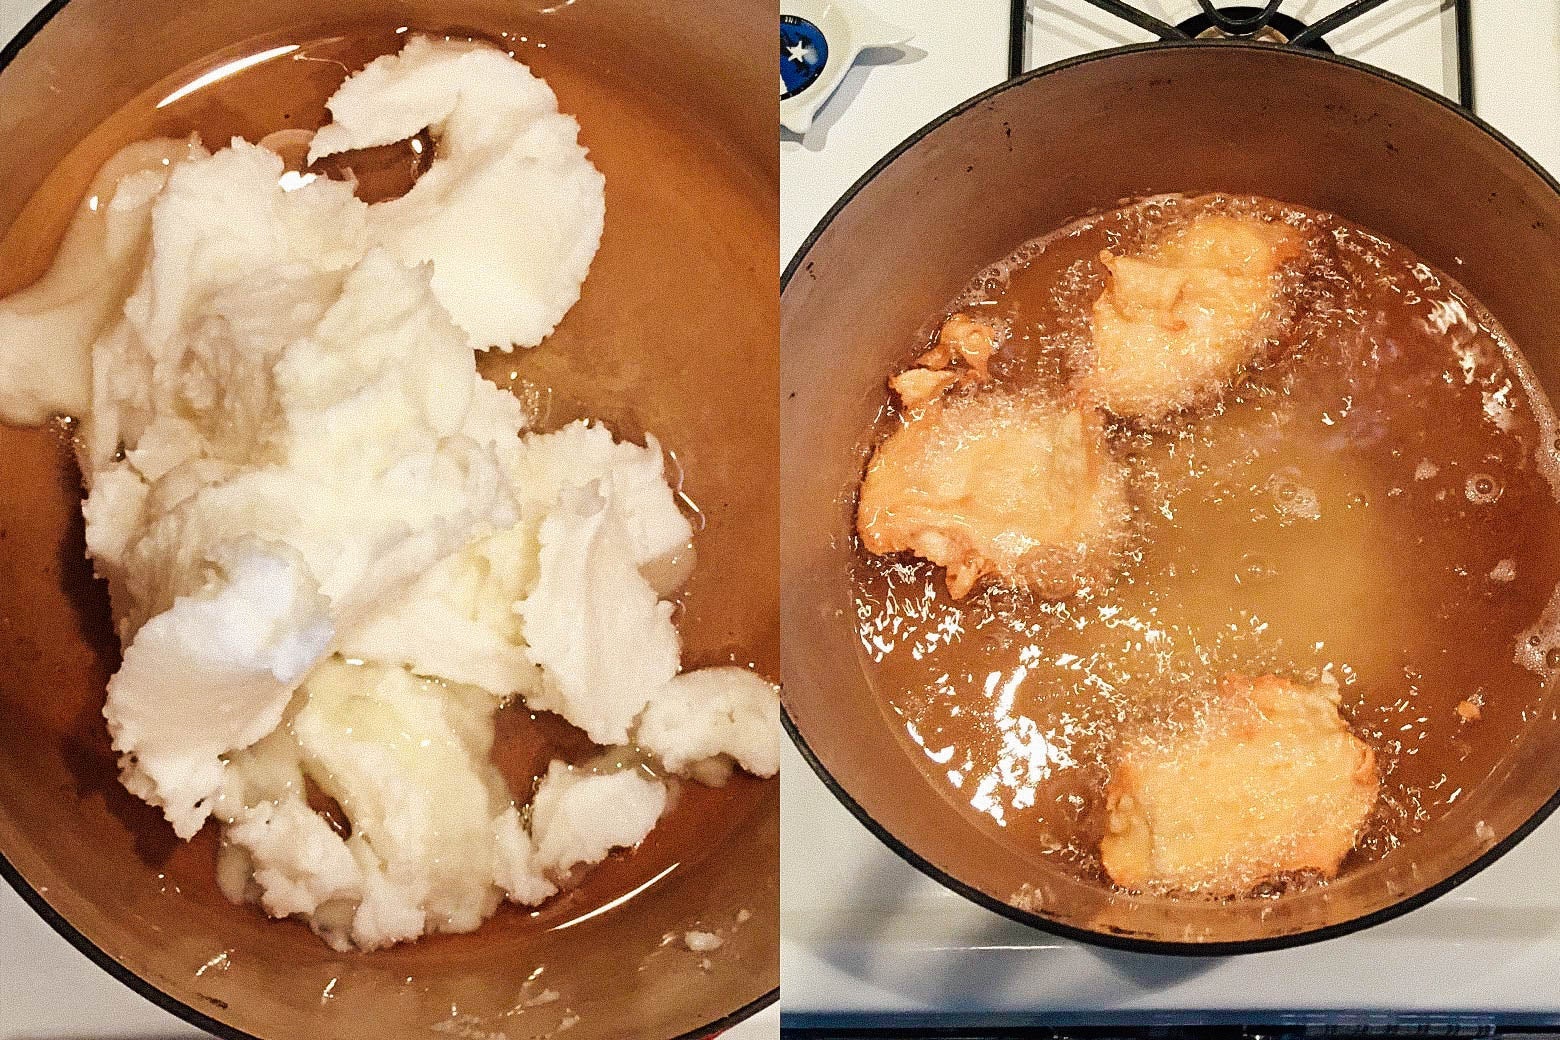 Side-by-side photos of Dutch oven full of lard, and some bubbling oily cakes.